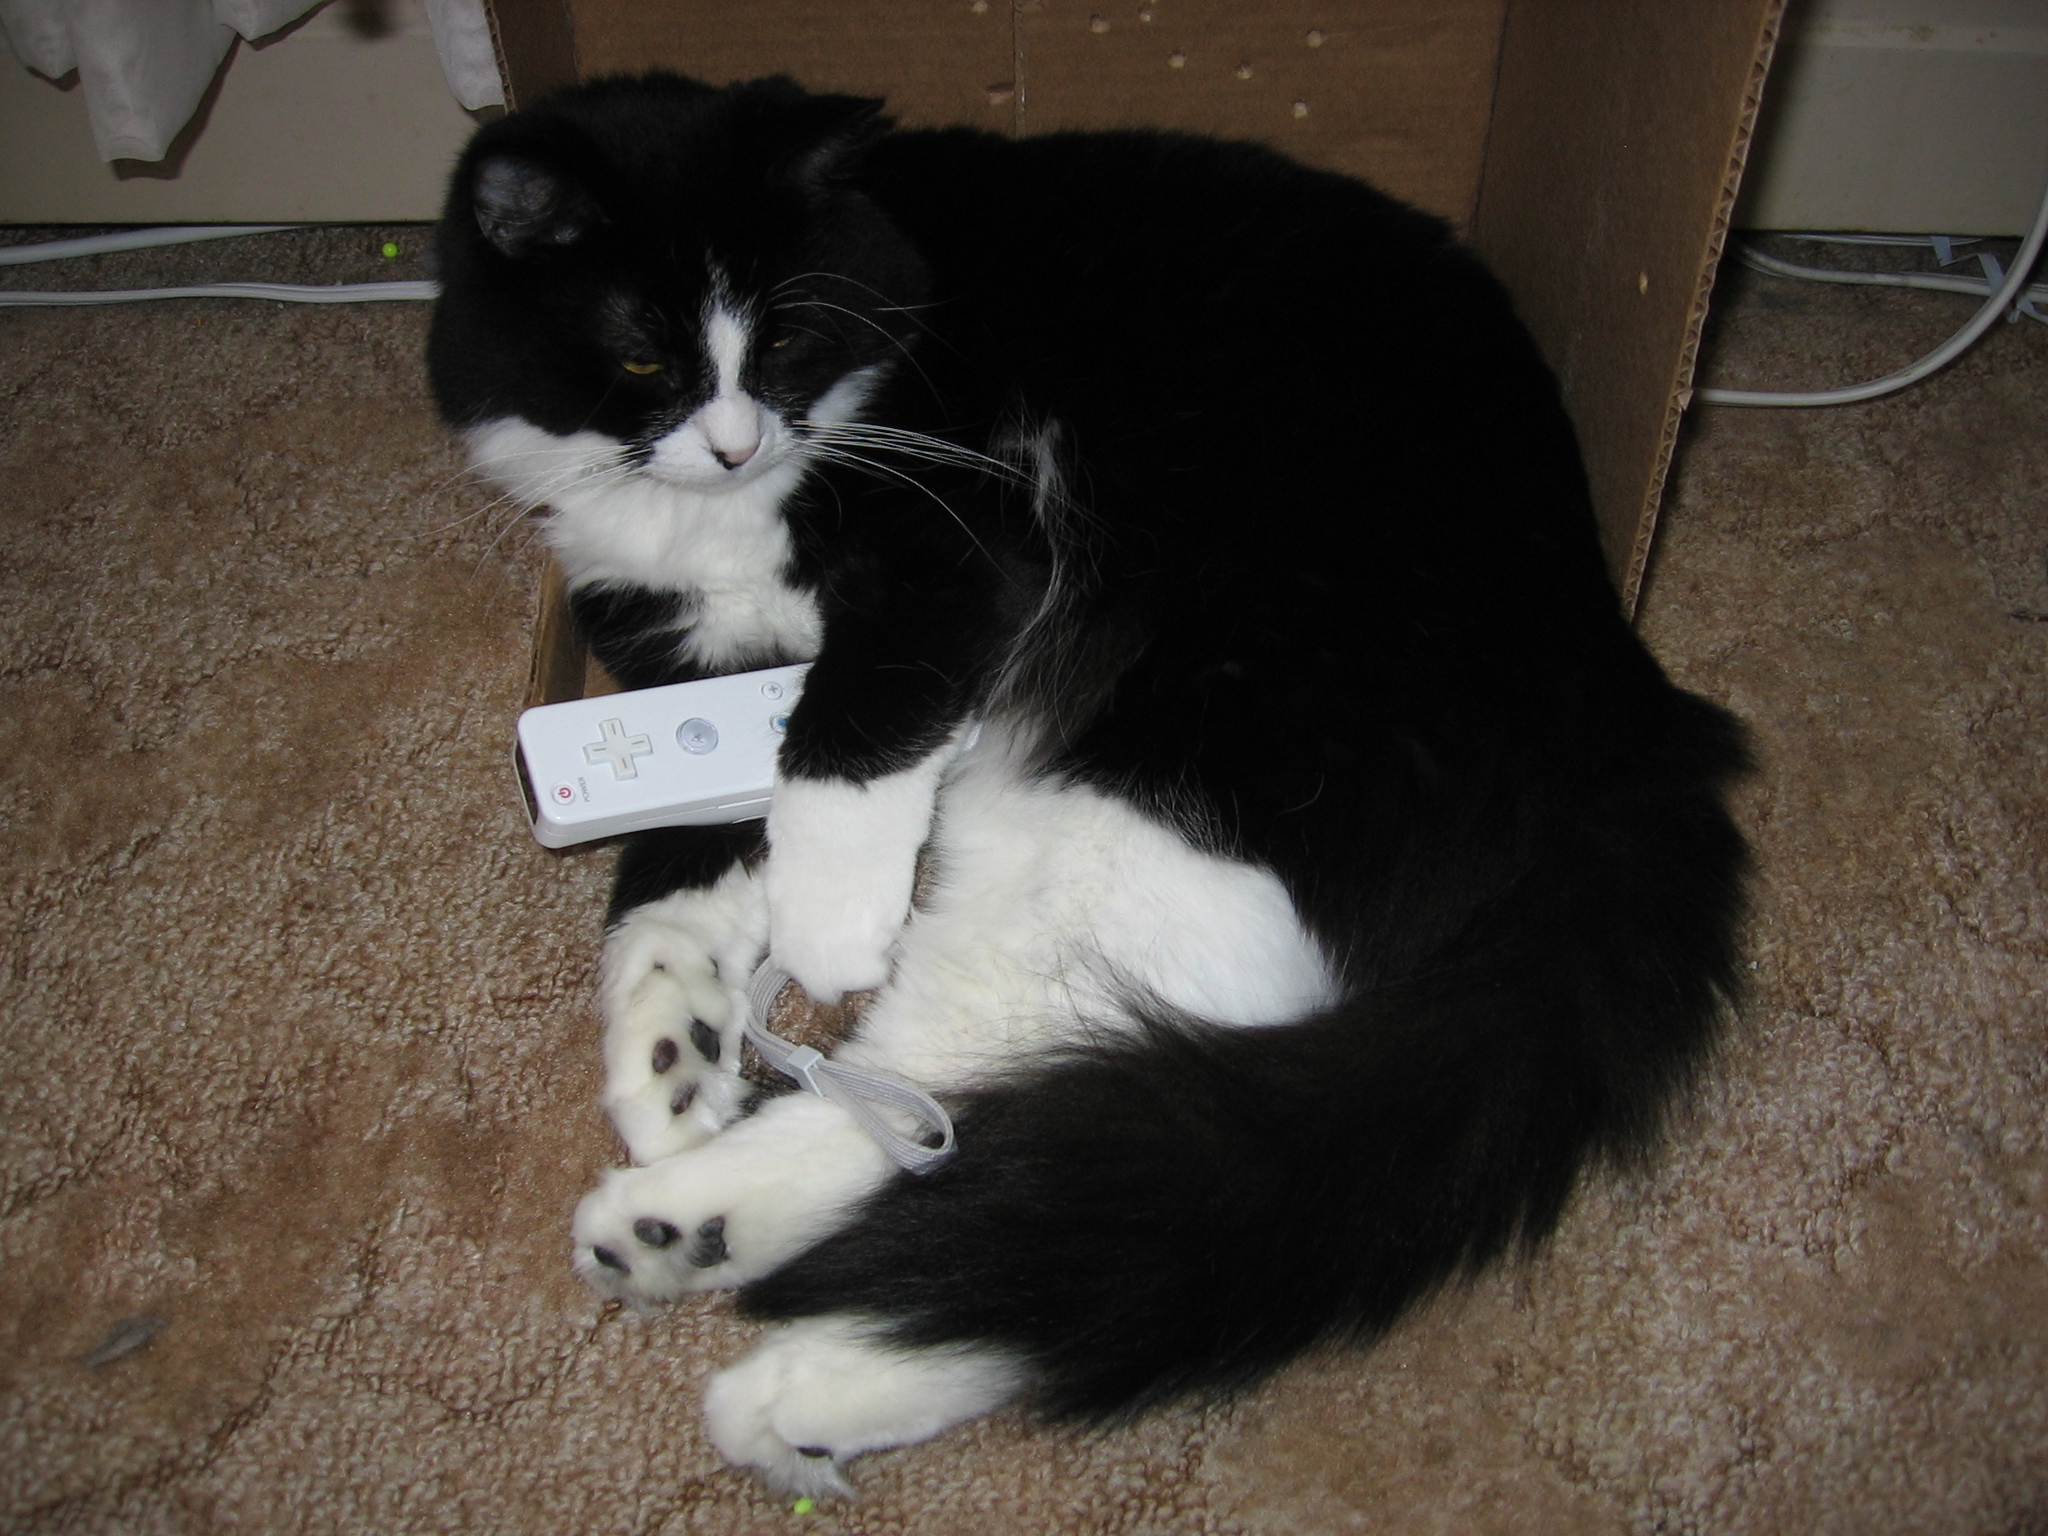 Nikita curled up beside a cardboard box, with a nintendo wiimote tucked into her paws.